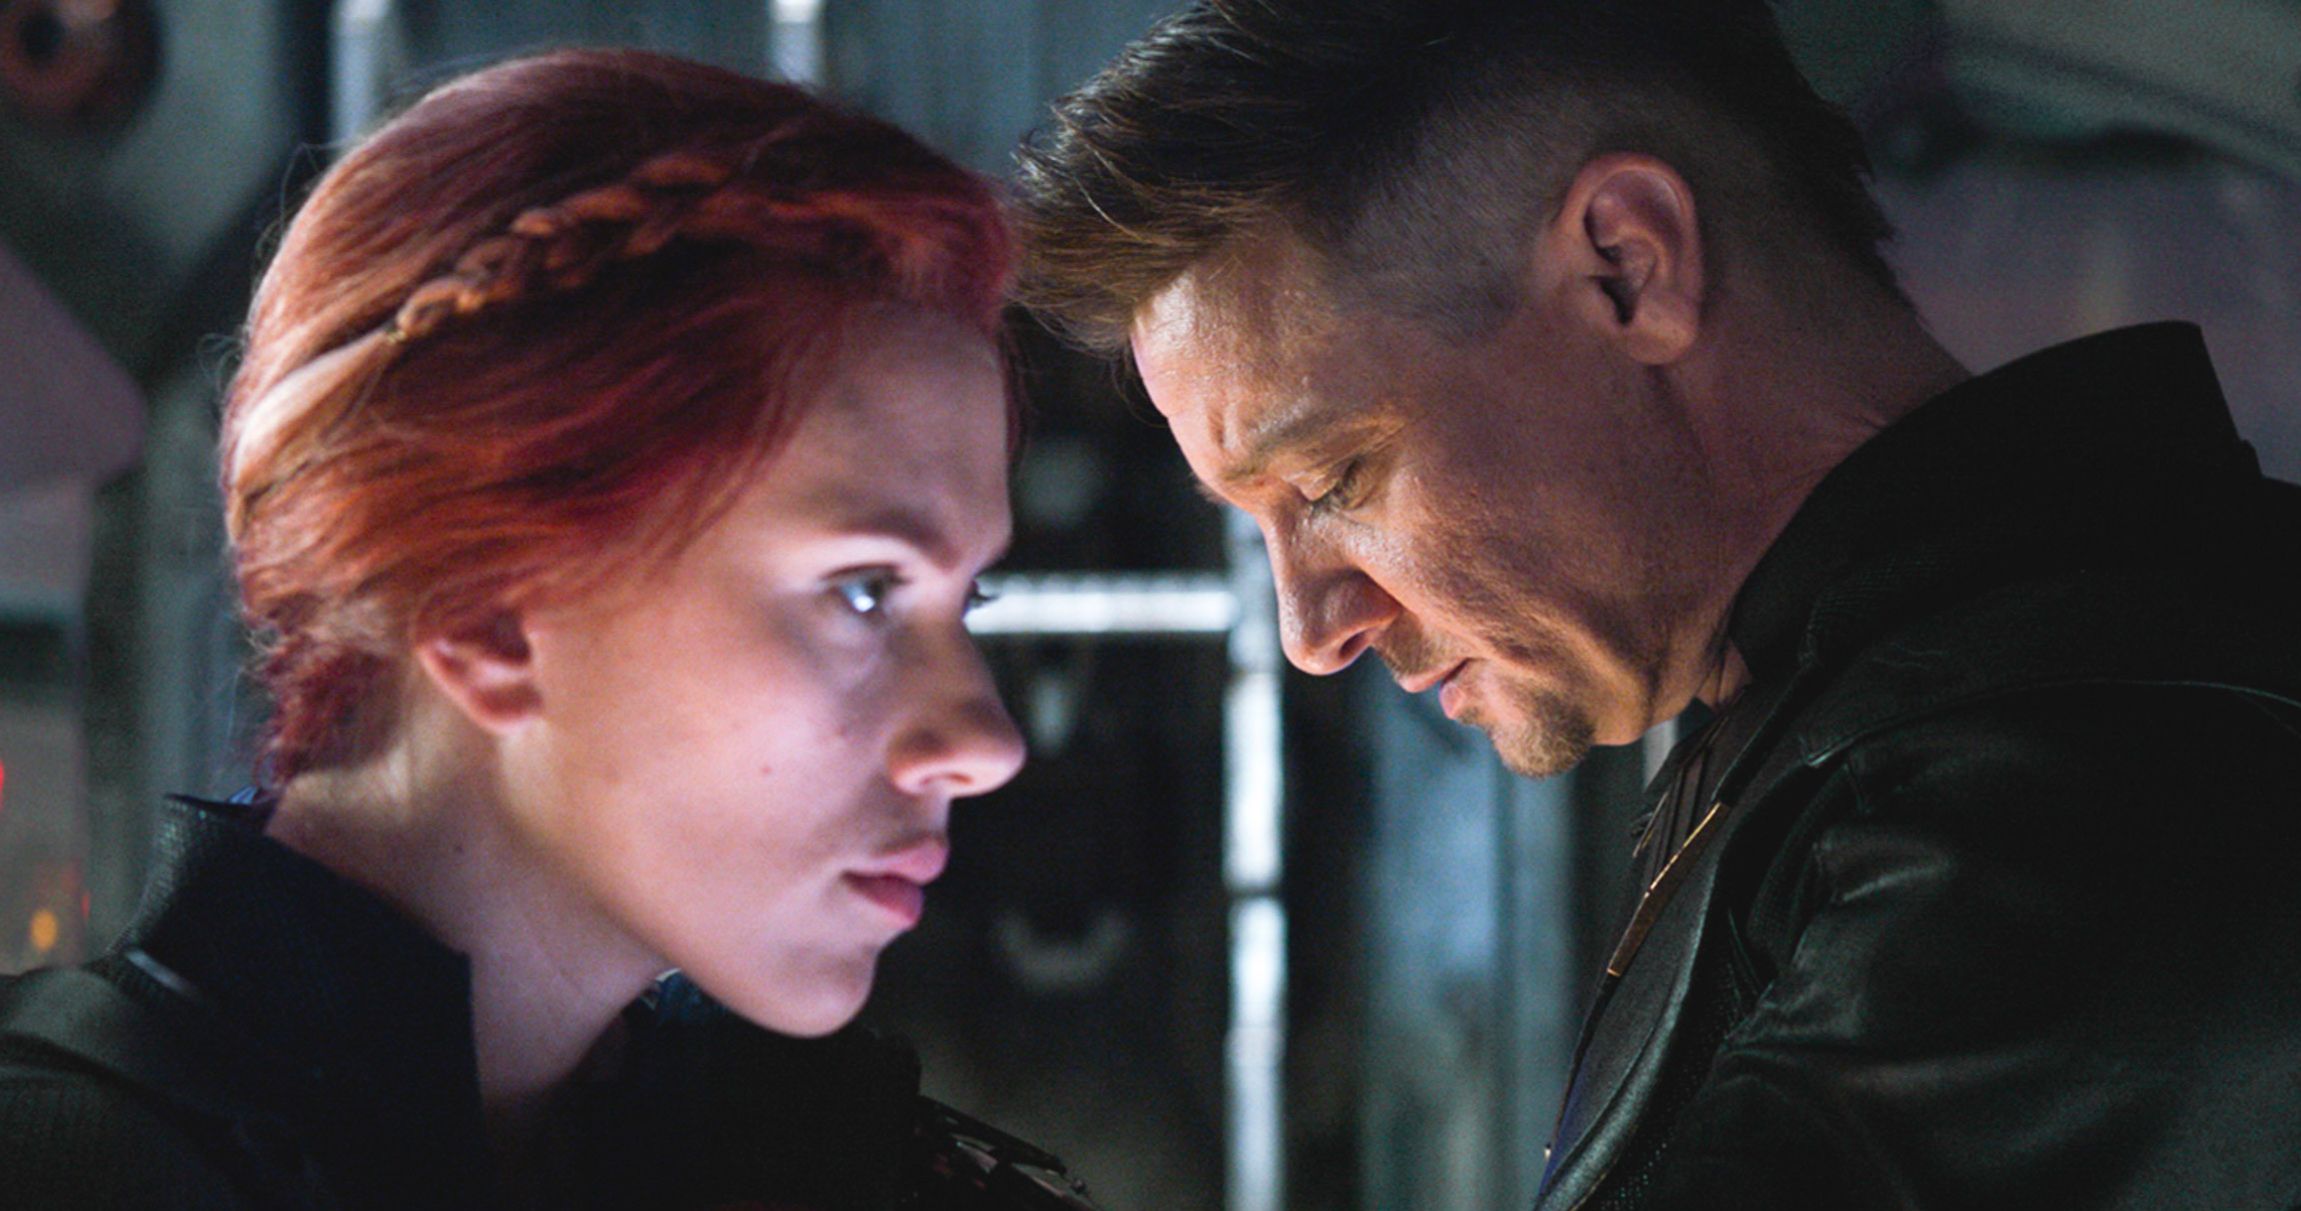 Black Widow &amp; Hawkeye Share an Emotional Moment in Avengers: Endgame BTS Image